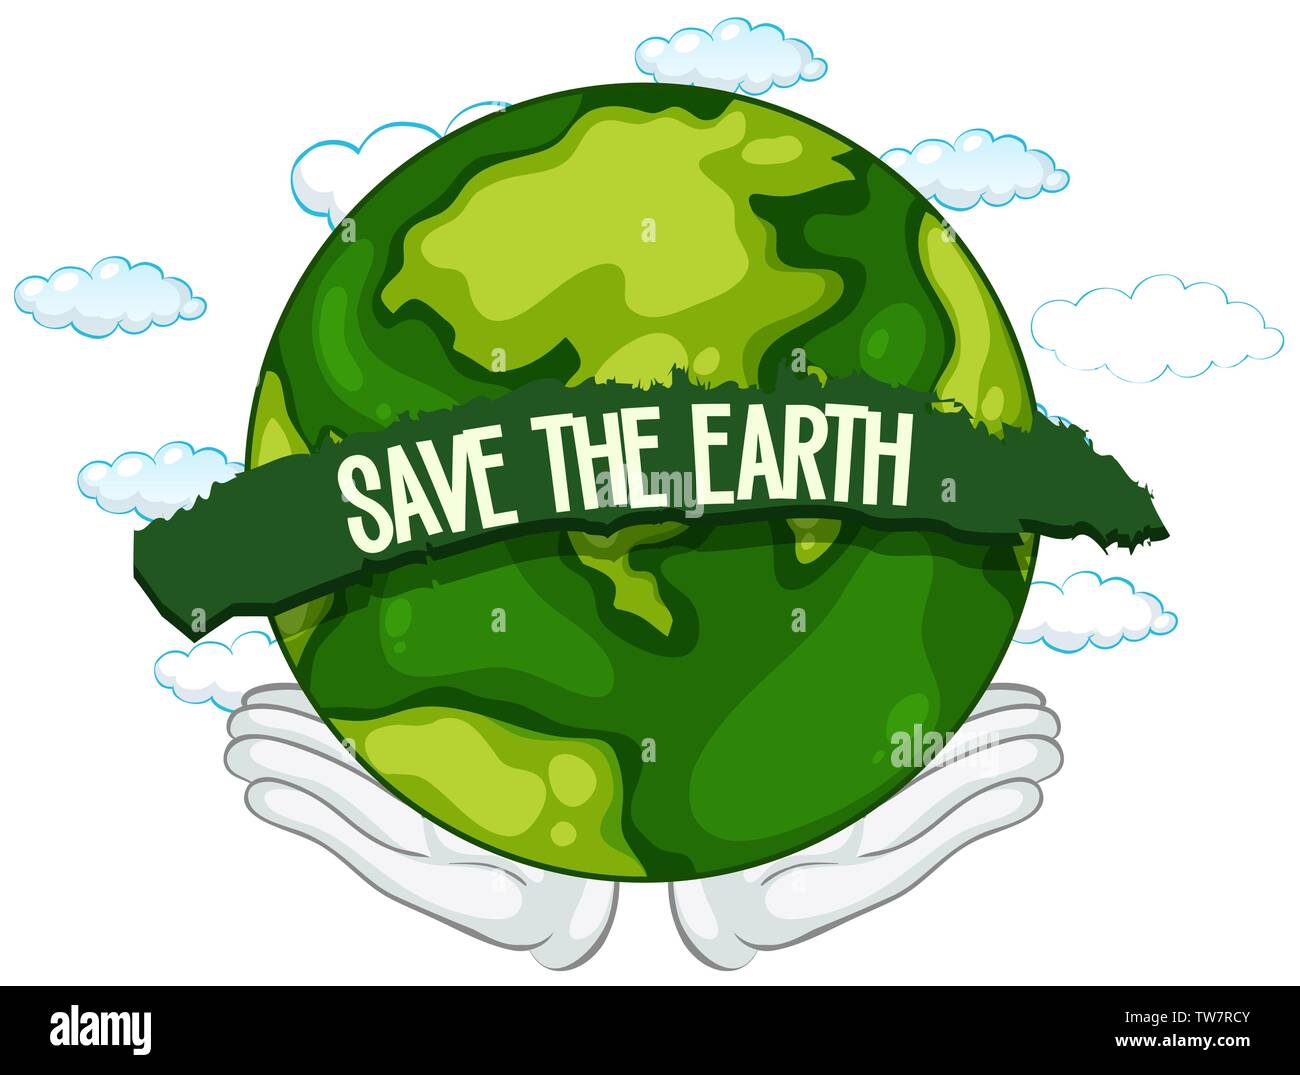 Save the earth icon illustration Stock Vector